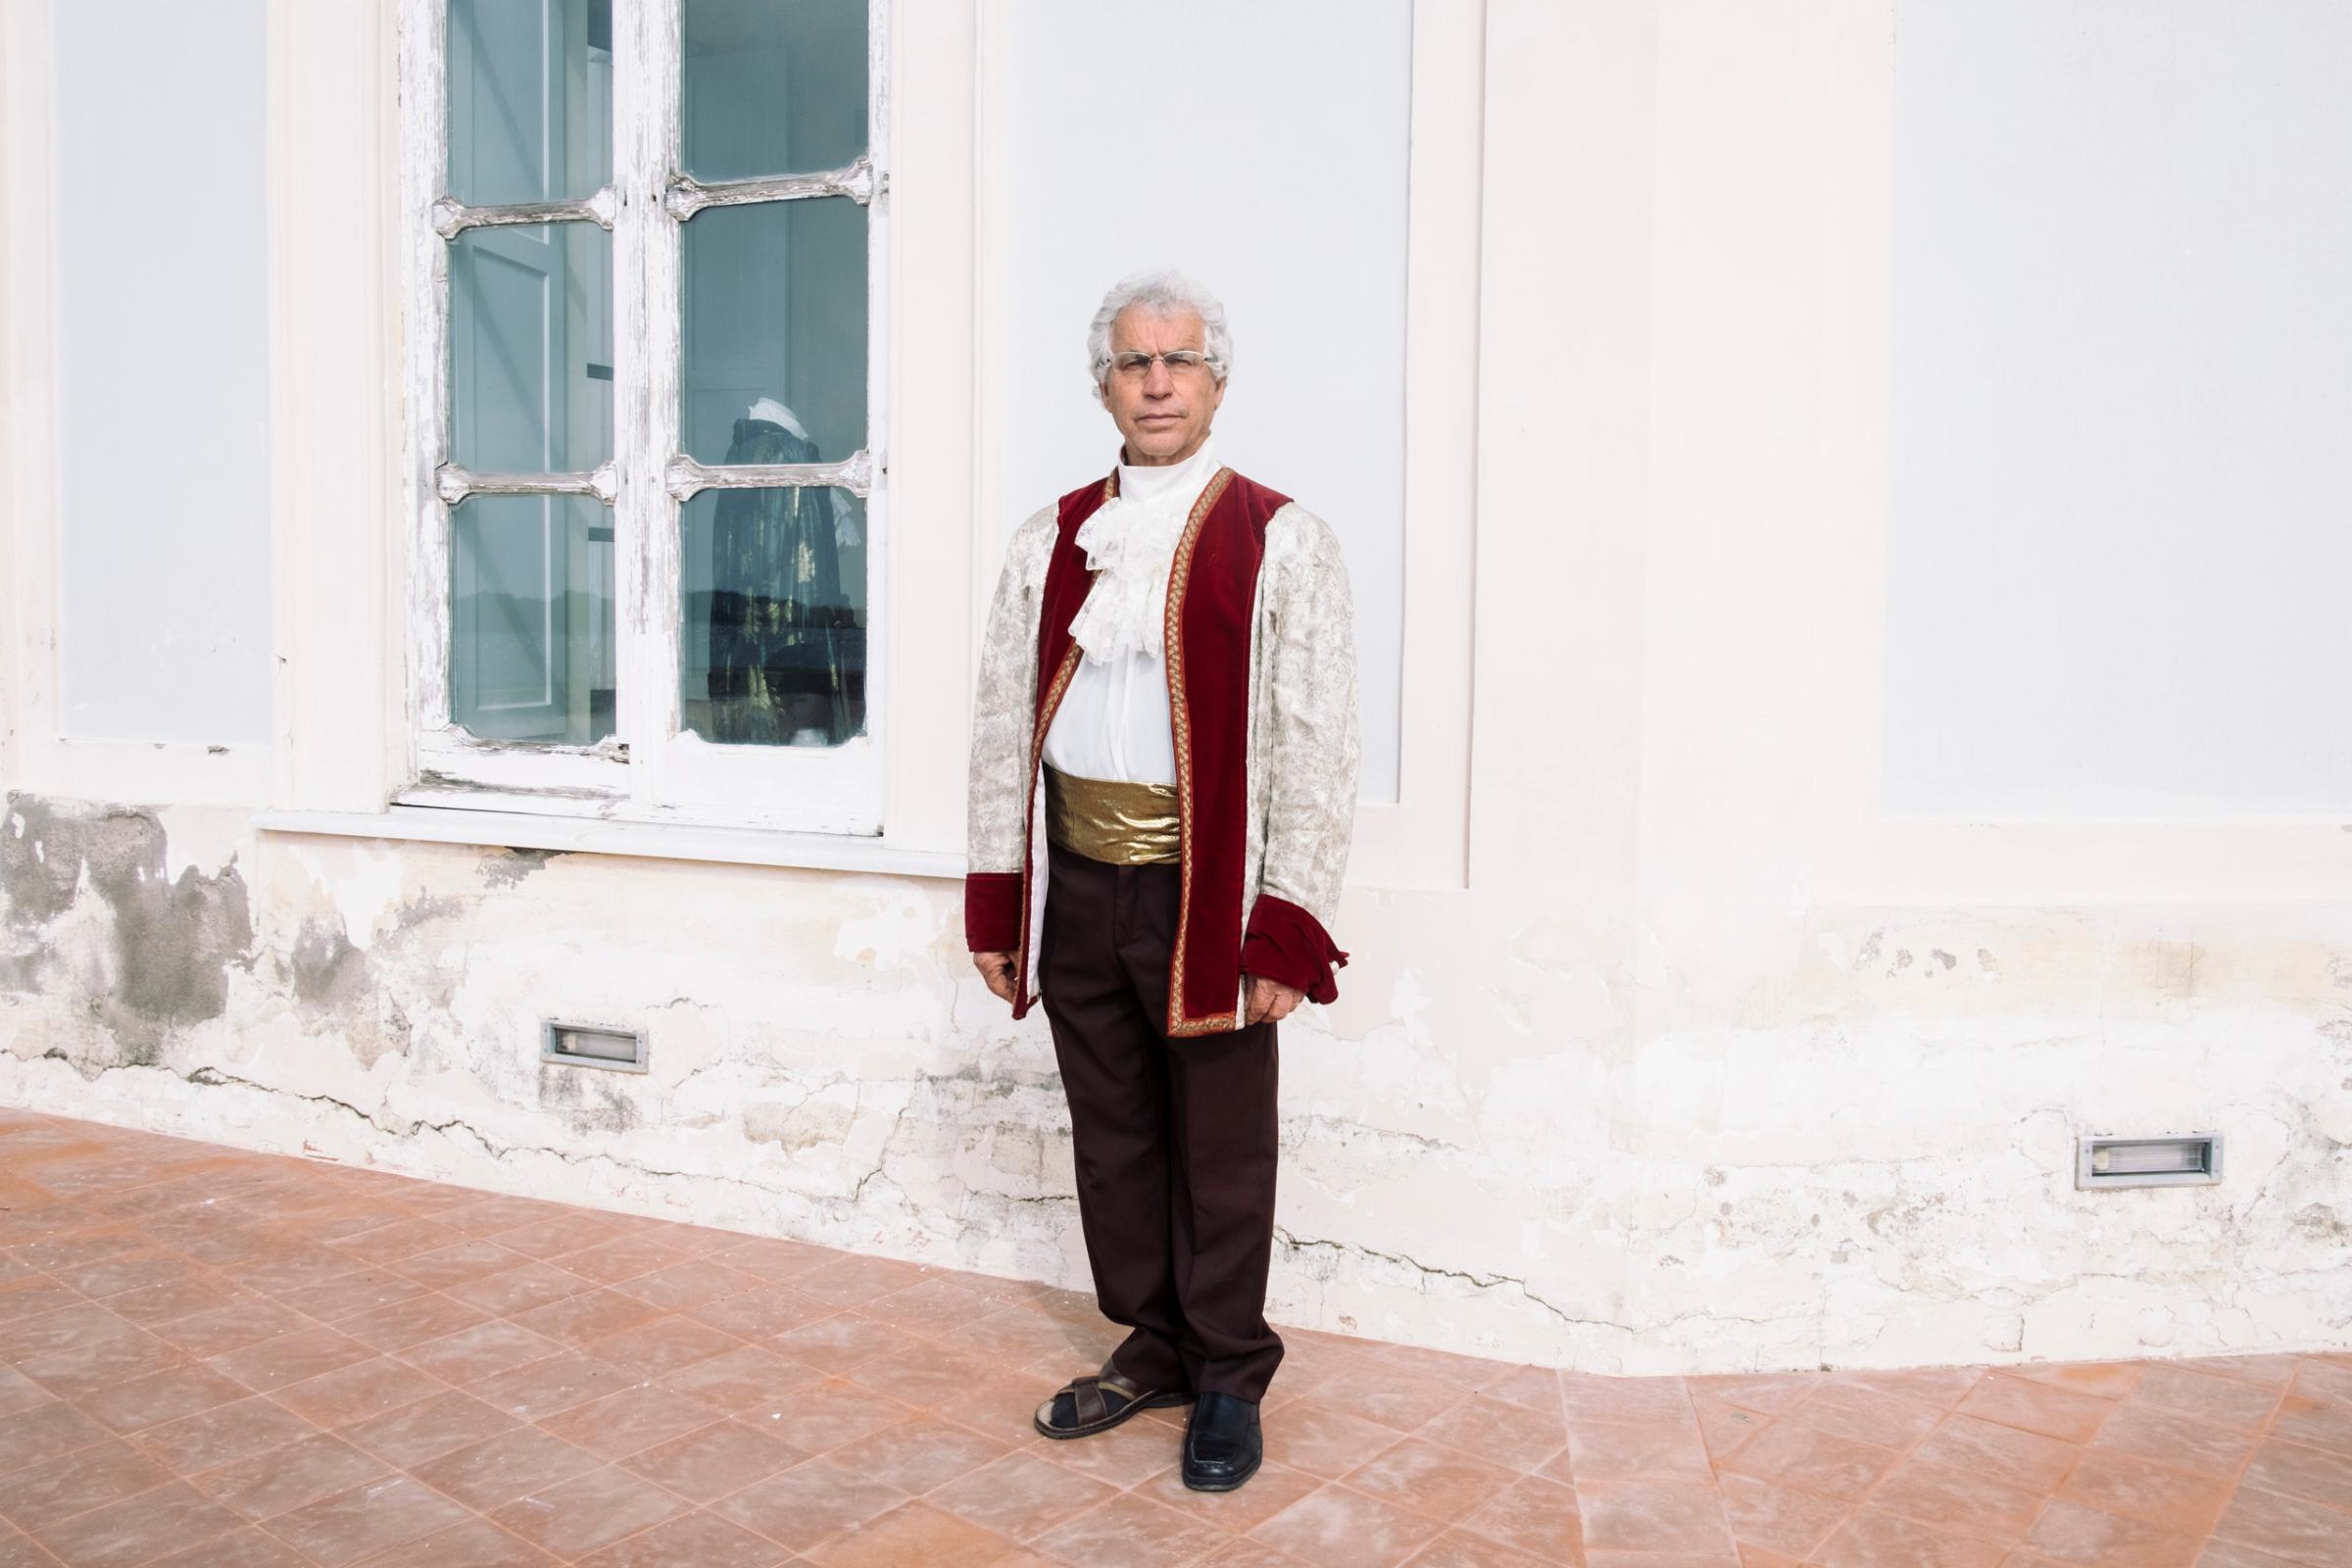 A local volunteer tour guide at the Casina Vanvitelliana, in Bacoli, March, 2016. The Casina Vanvitelliana was a Bourbon hunting and fishing house built on top of a little island in Lake Fusaro.